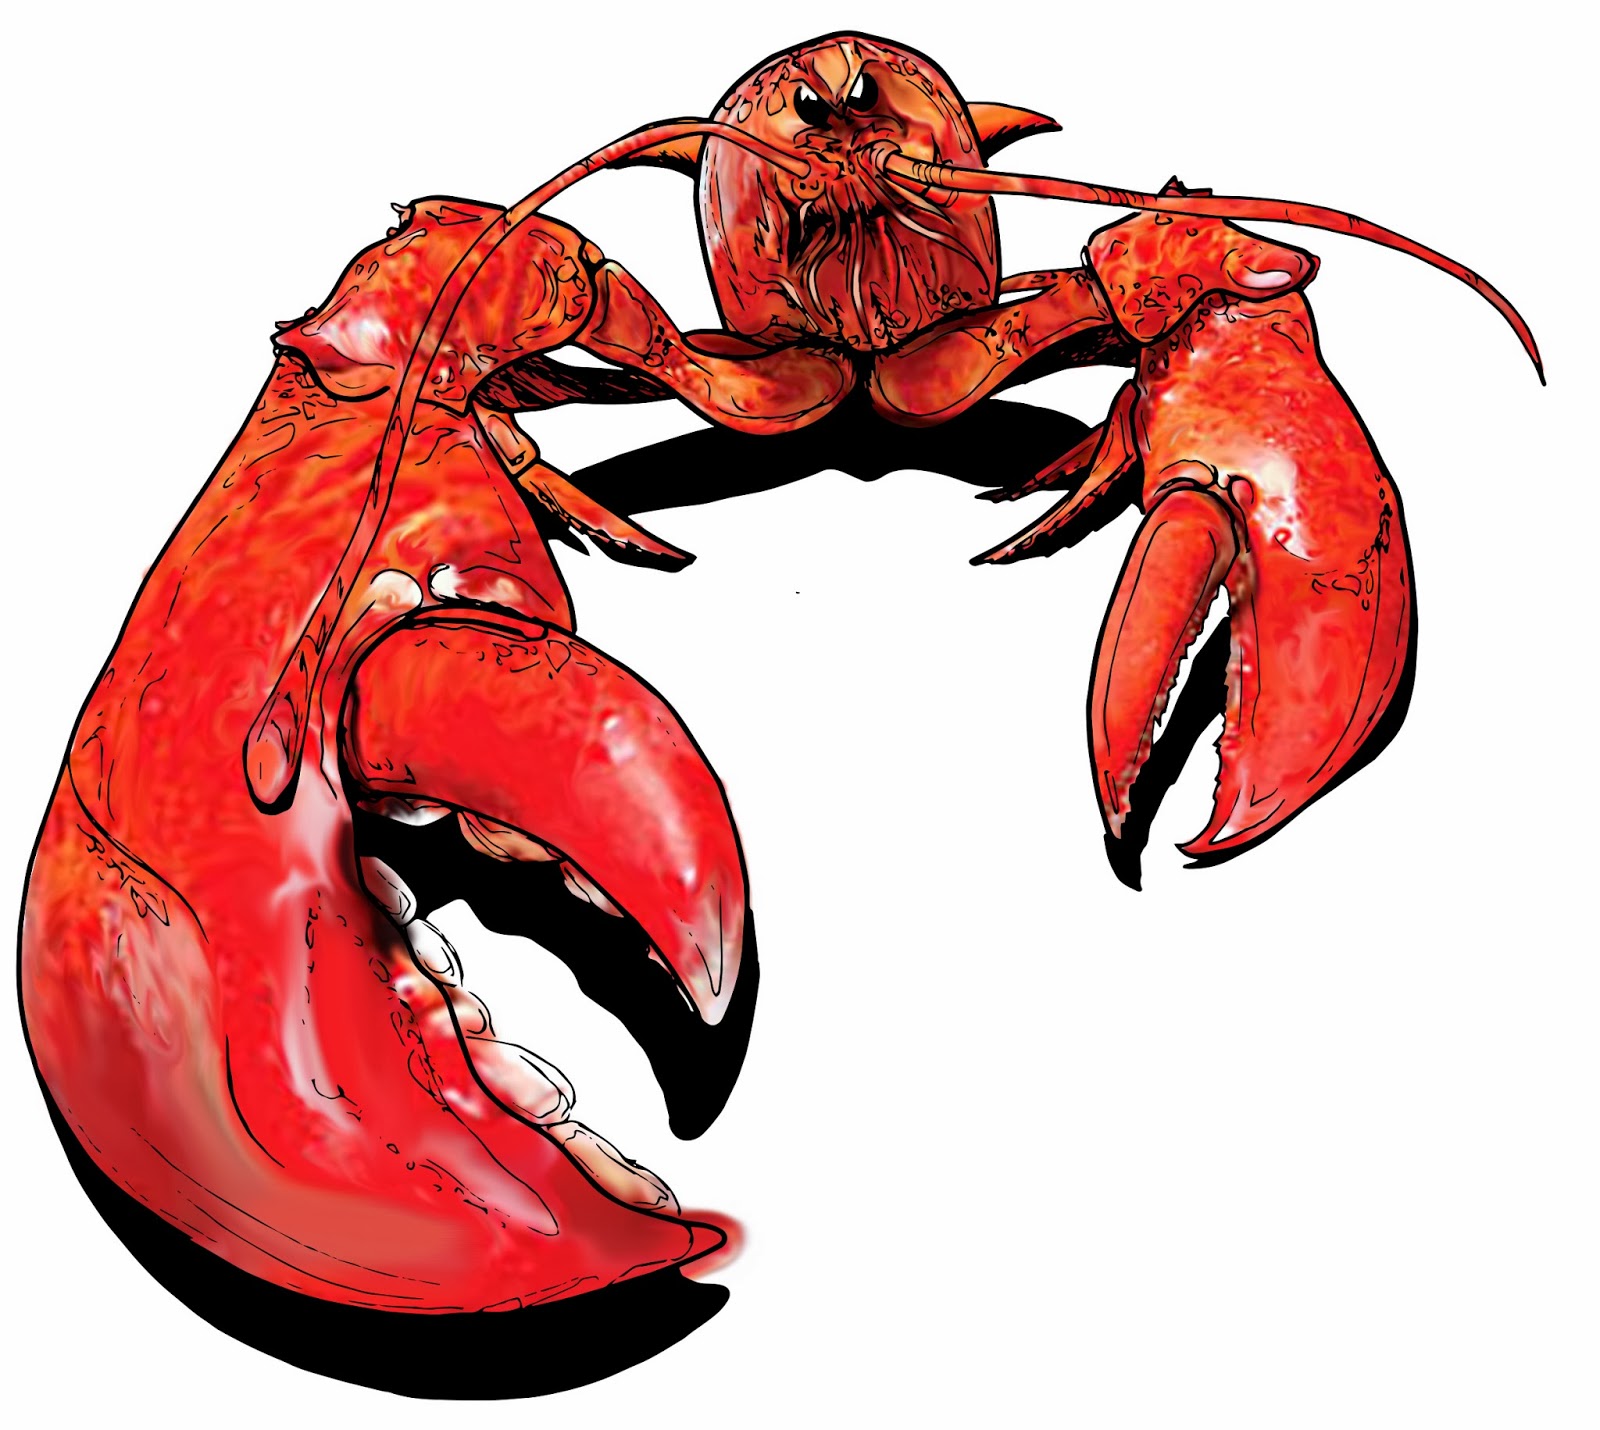 Lobster claws illustration free clipart images